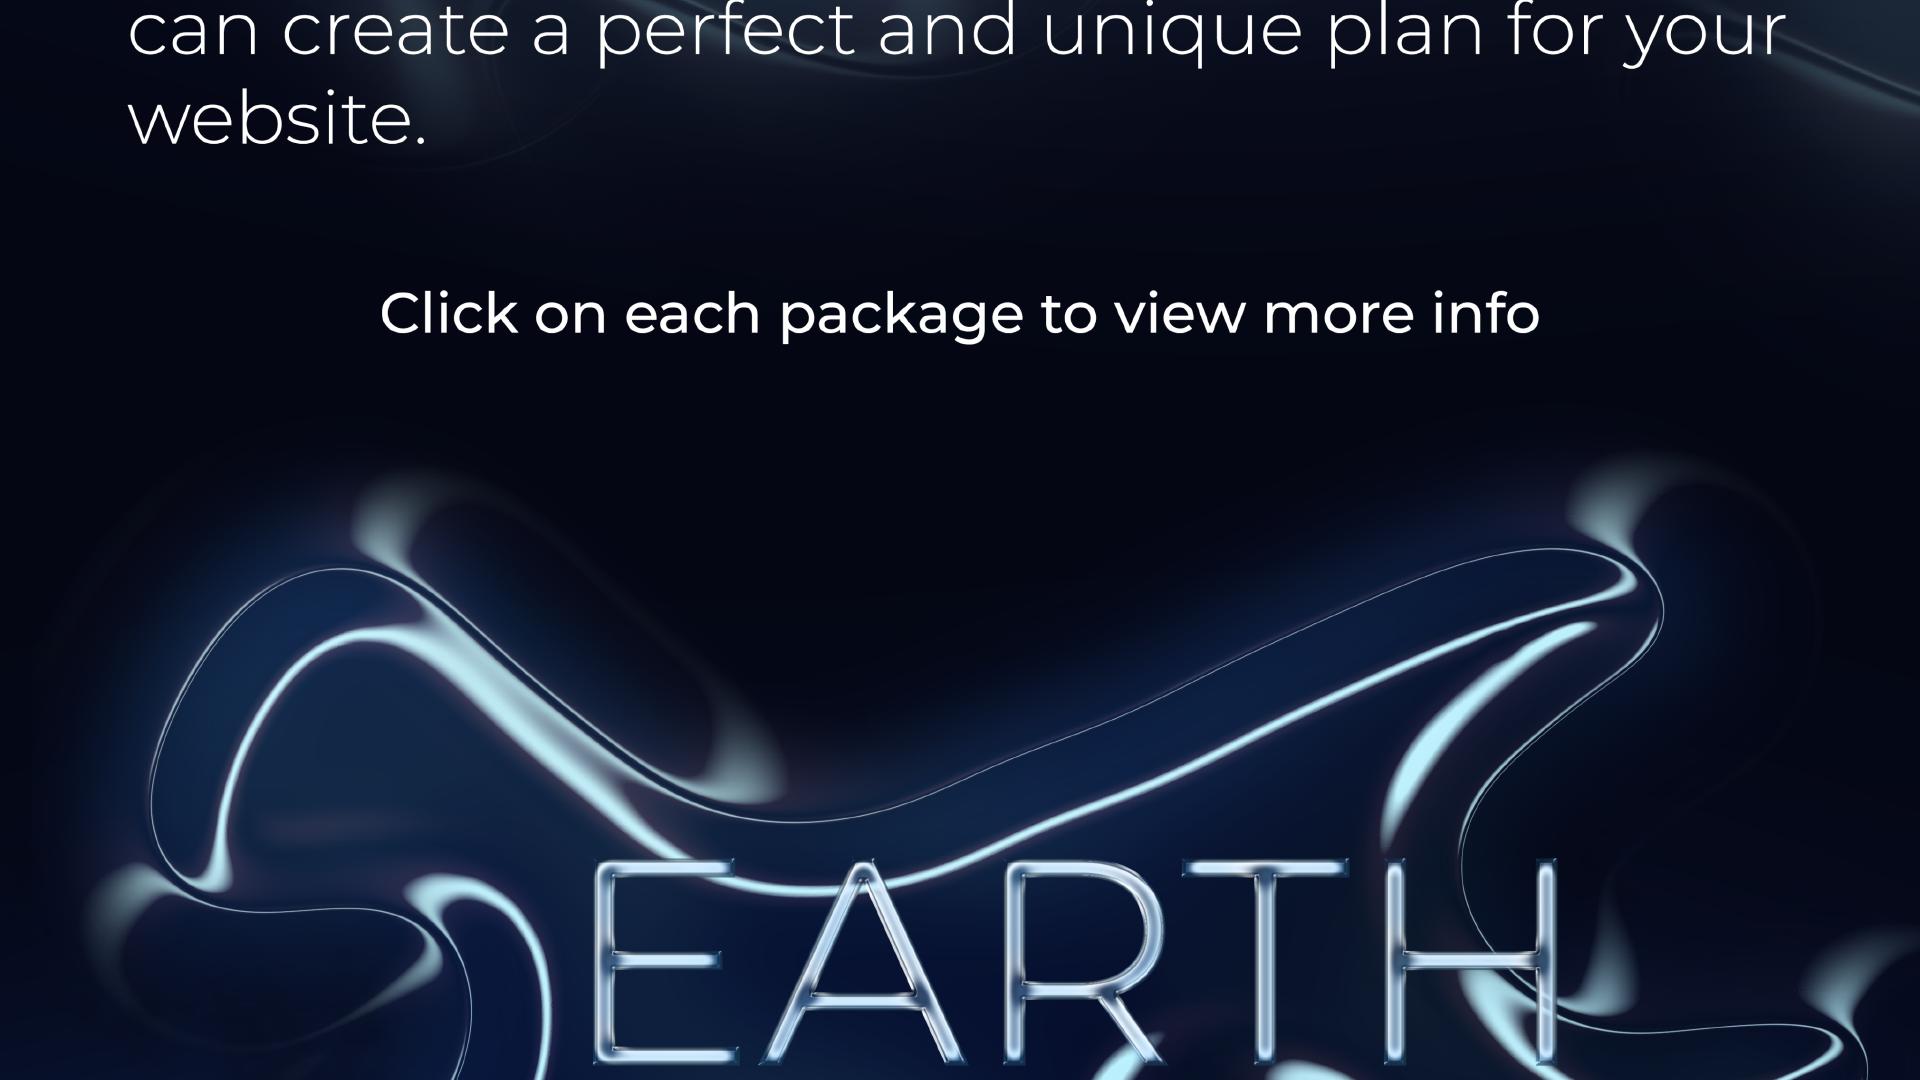 ... can create a perfect and unique plan for your website. Click on each package to view more info. Packages: 'Earth' ...